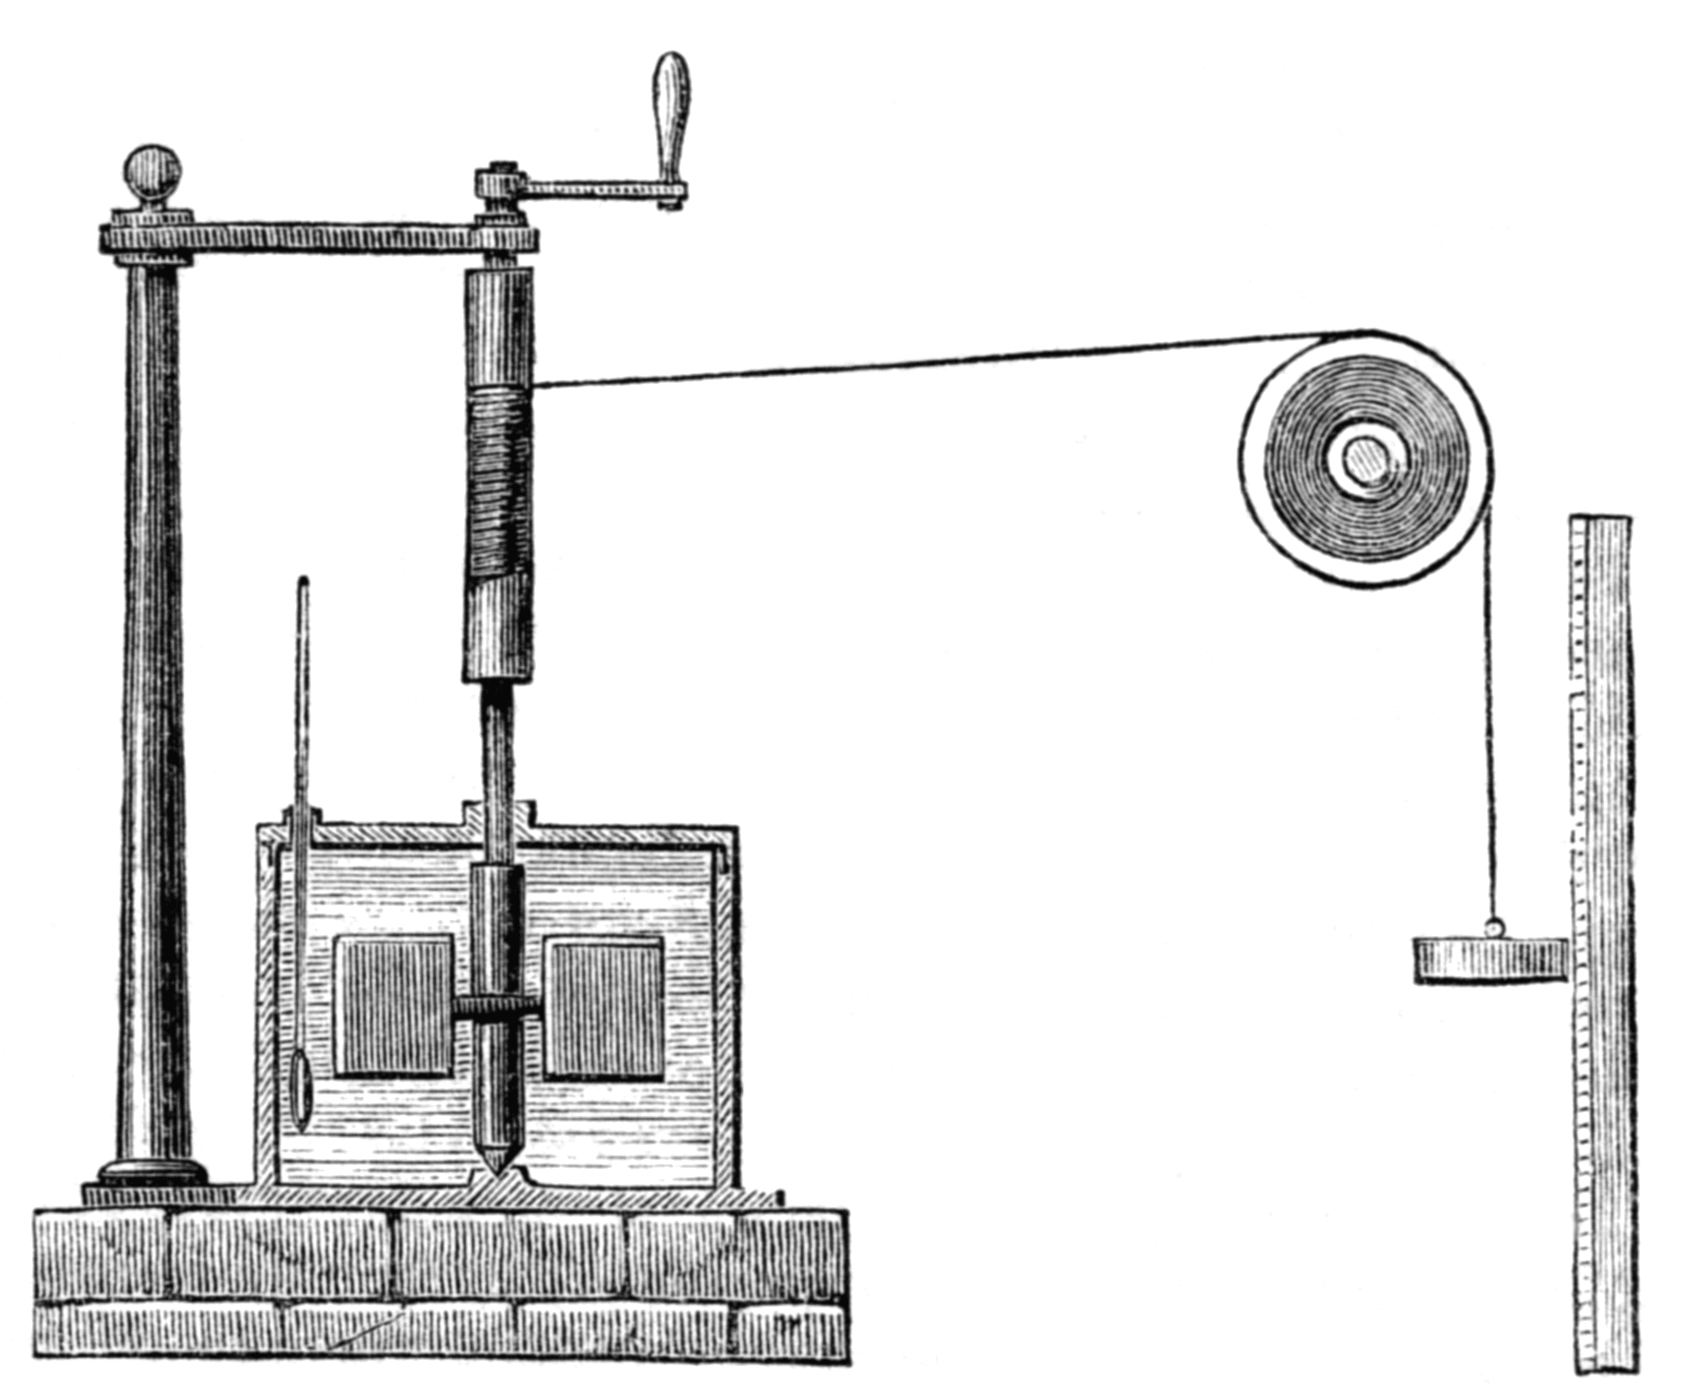 An illustration of Joule's apparatus for measuring the mechanical equivalent of heat, featuring a large wooden apparatus with a vertically standing frame connected to a horizontal beam. From the horizontal beam, a string extends to a pulley system holding a circular weight, demonstrating the principles of mechanical advantage and force distribution. This depicts an early scientific device used for educational or experimental purposes in physics.